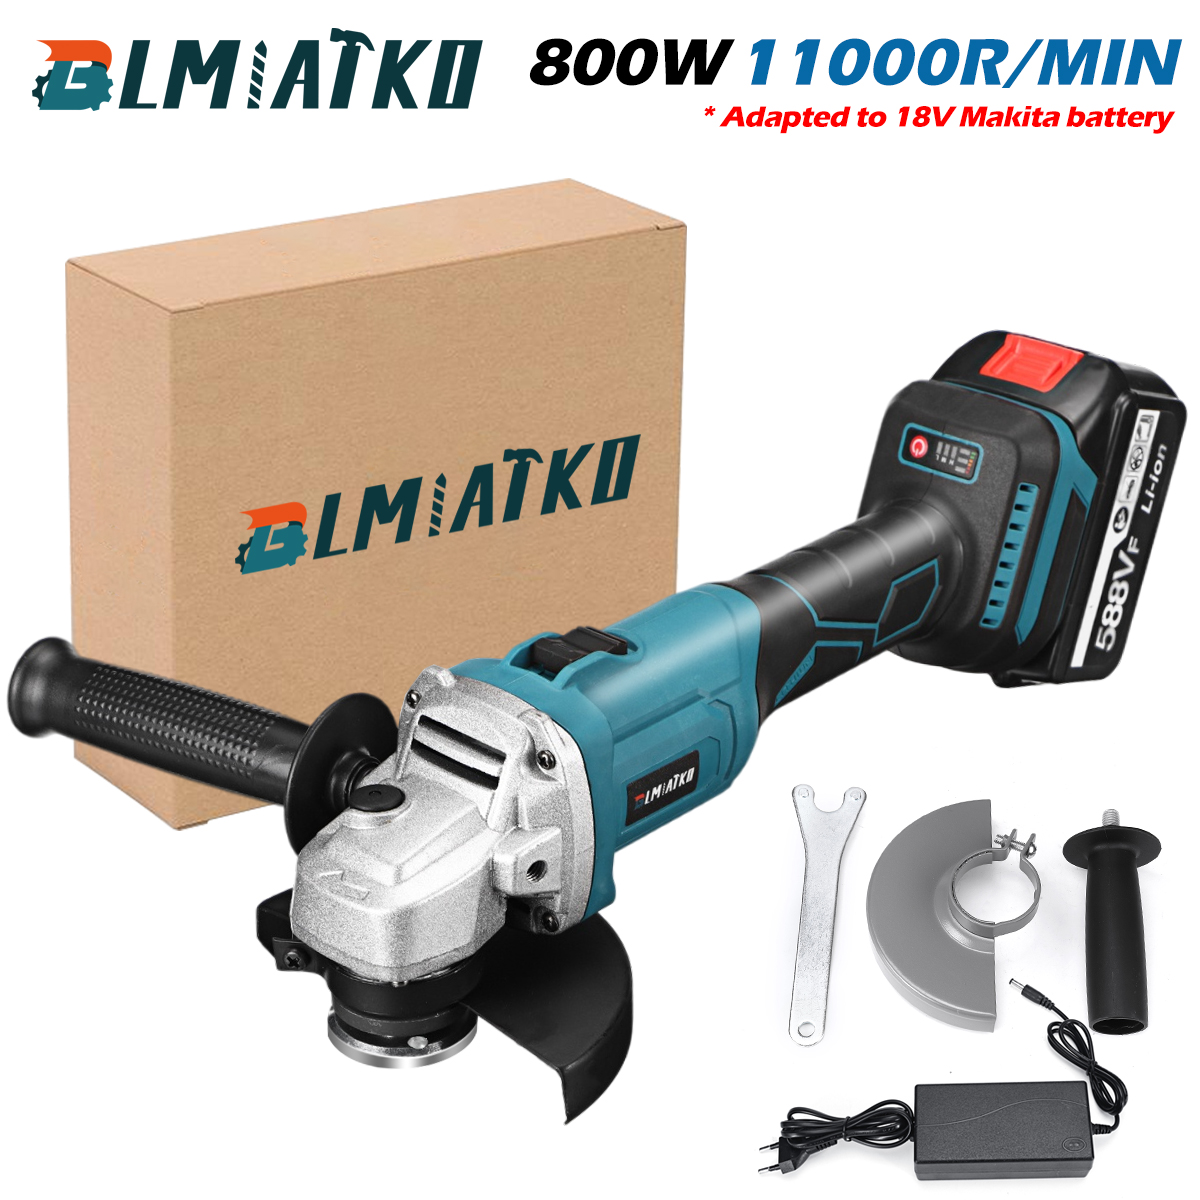 BLMIATKO-220V-125MM-100MM-34-Speed-Brushless-Electric-Angle-Grinder-Cutting-Grinding-Machine-Power-T-1943200-12